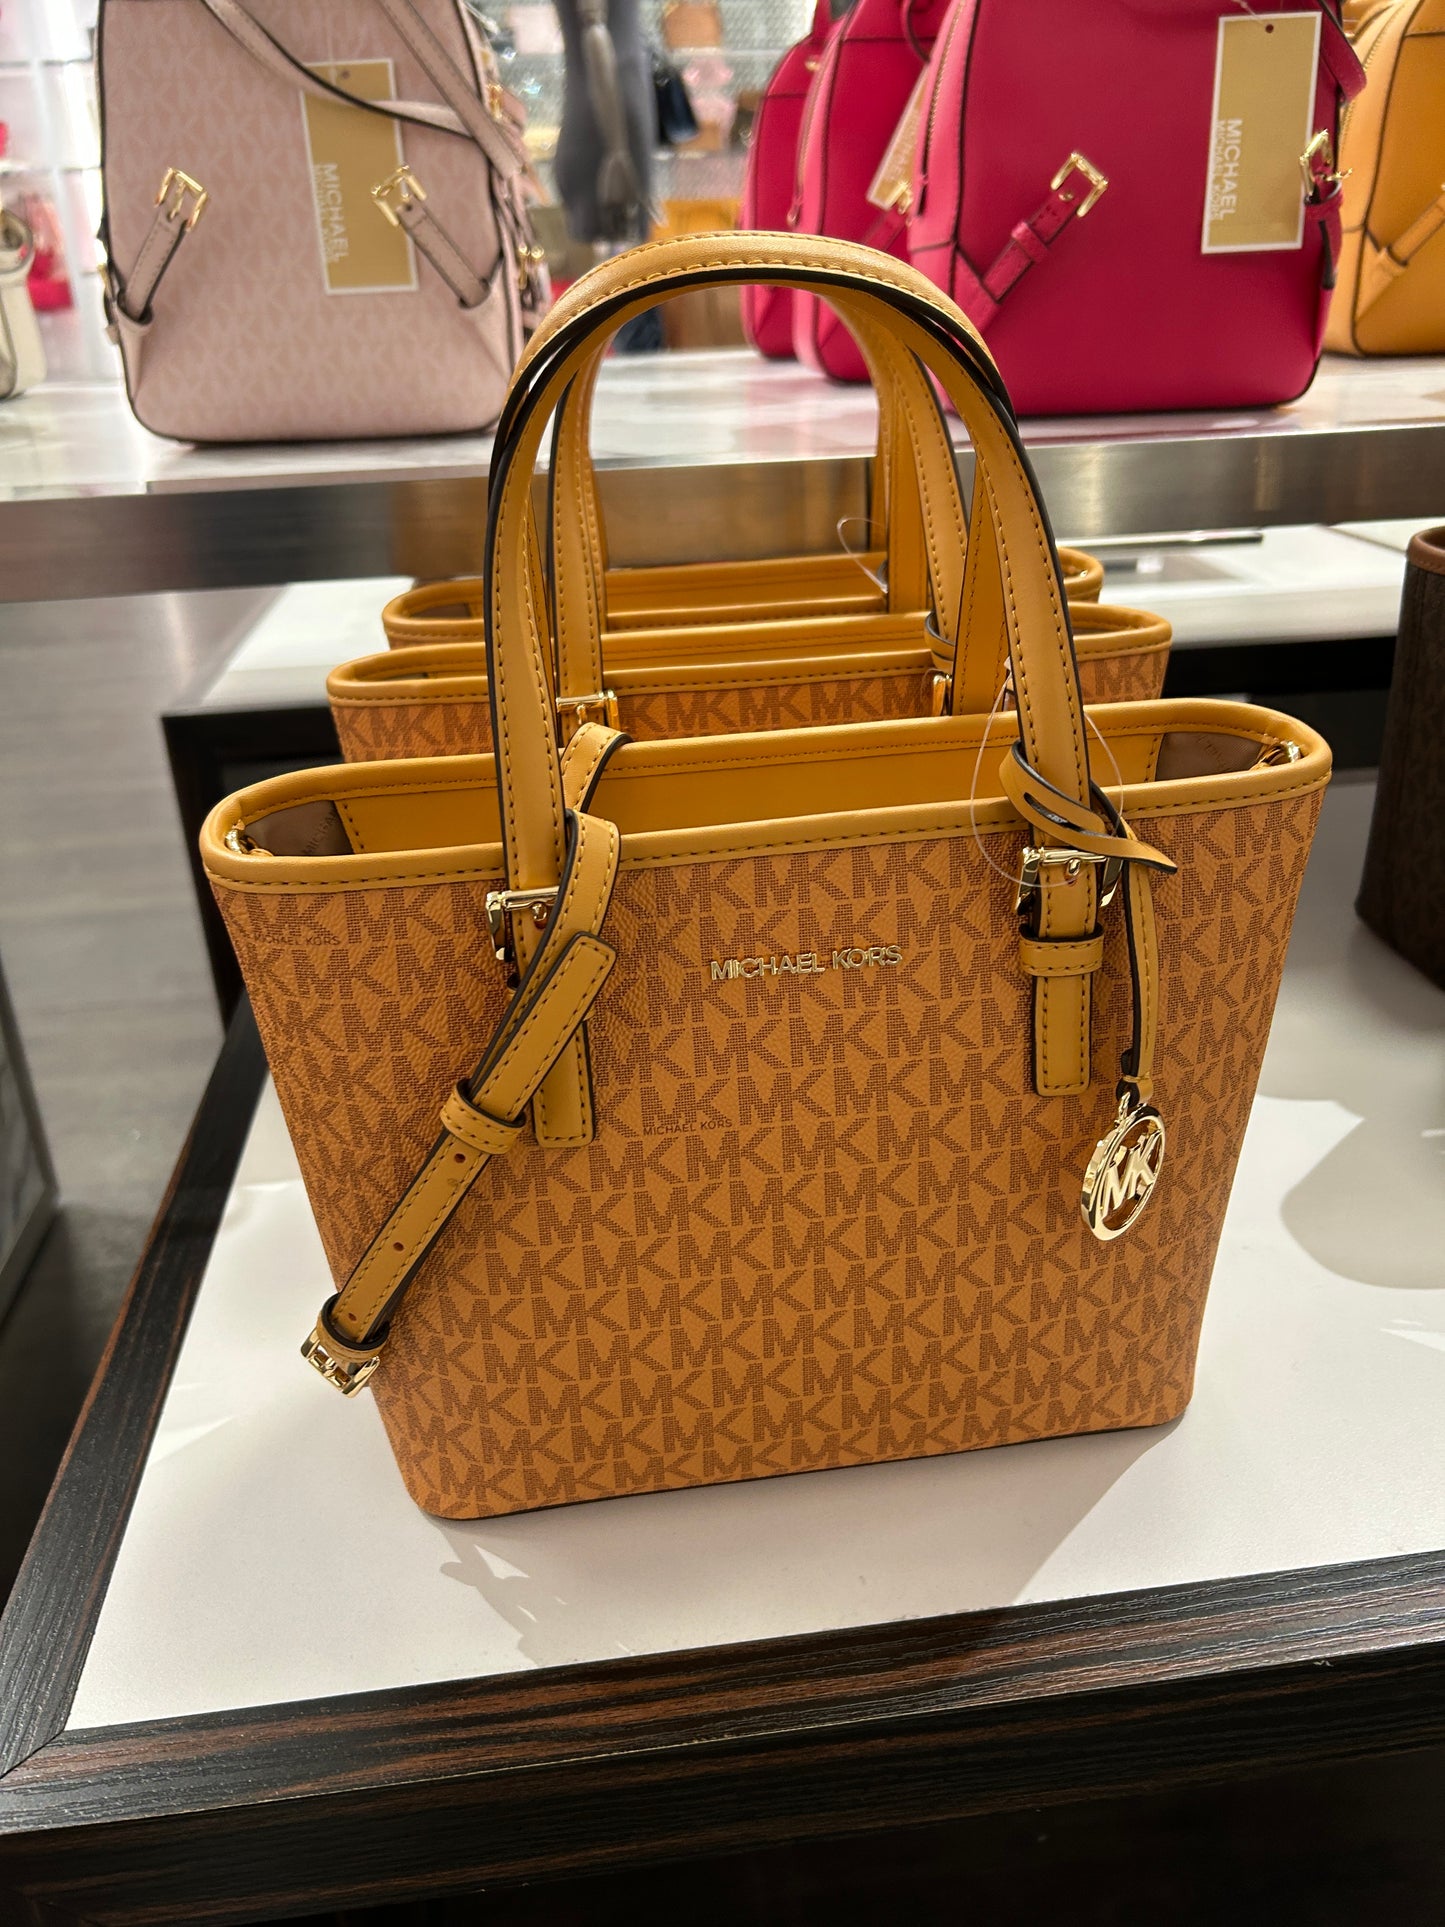 MICHAEL KORS Outlet! NEW Carmen Bags! 60-70-75% SALE! CLEARANCE! Shop with  Me! - YouTube